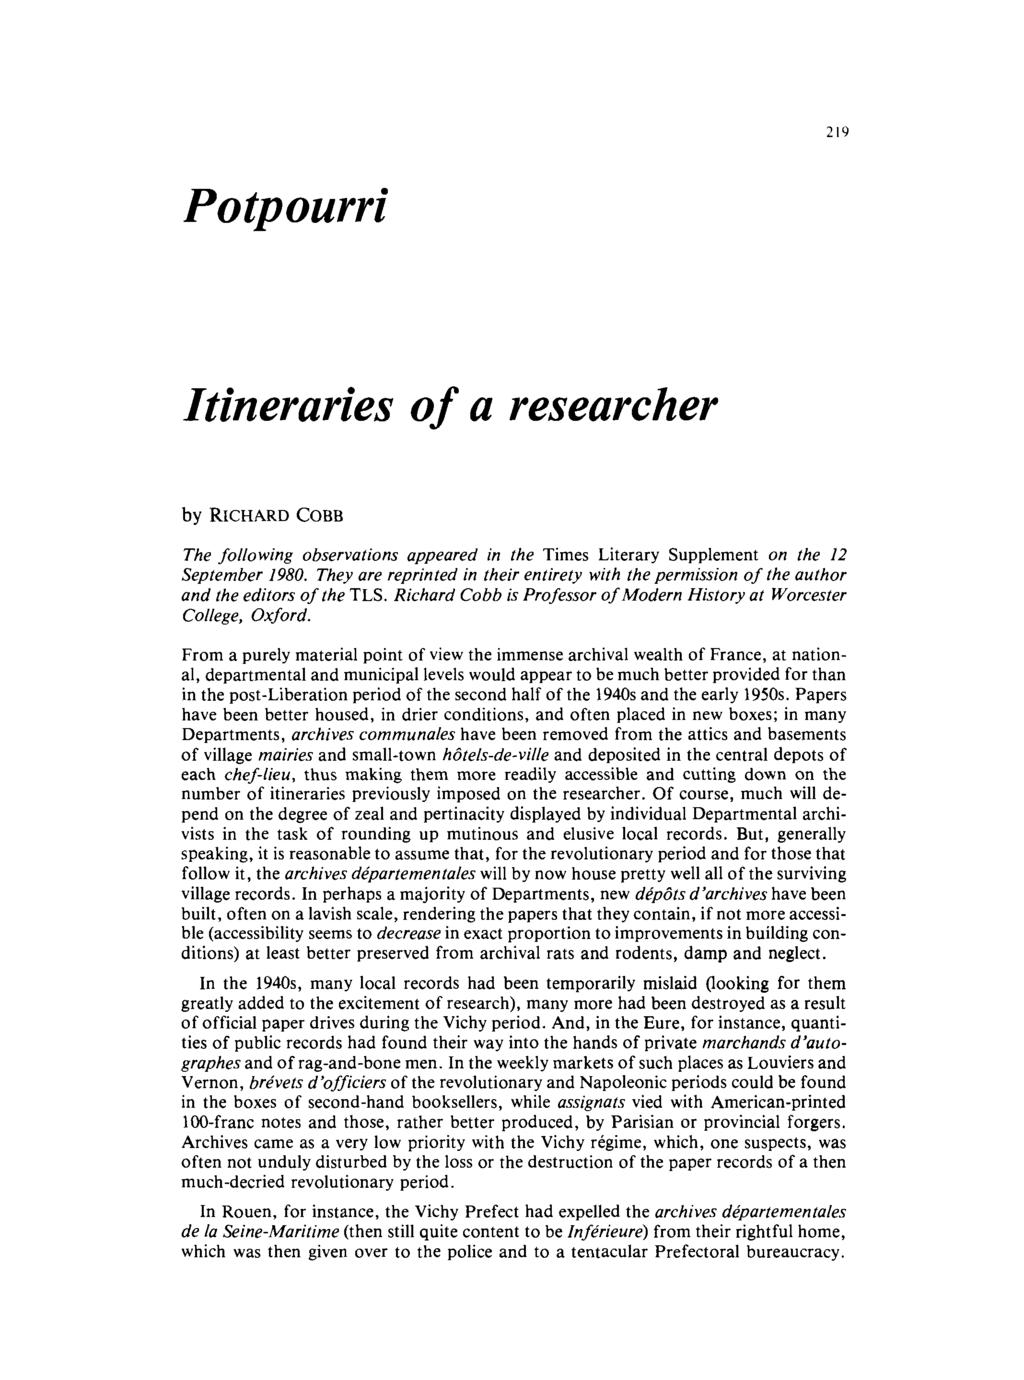 Potpourri Itineraries of a researcher The following observations appeared in the Times Literary Supplement on the 12 September 1980.